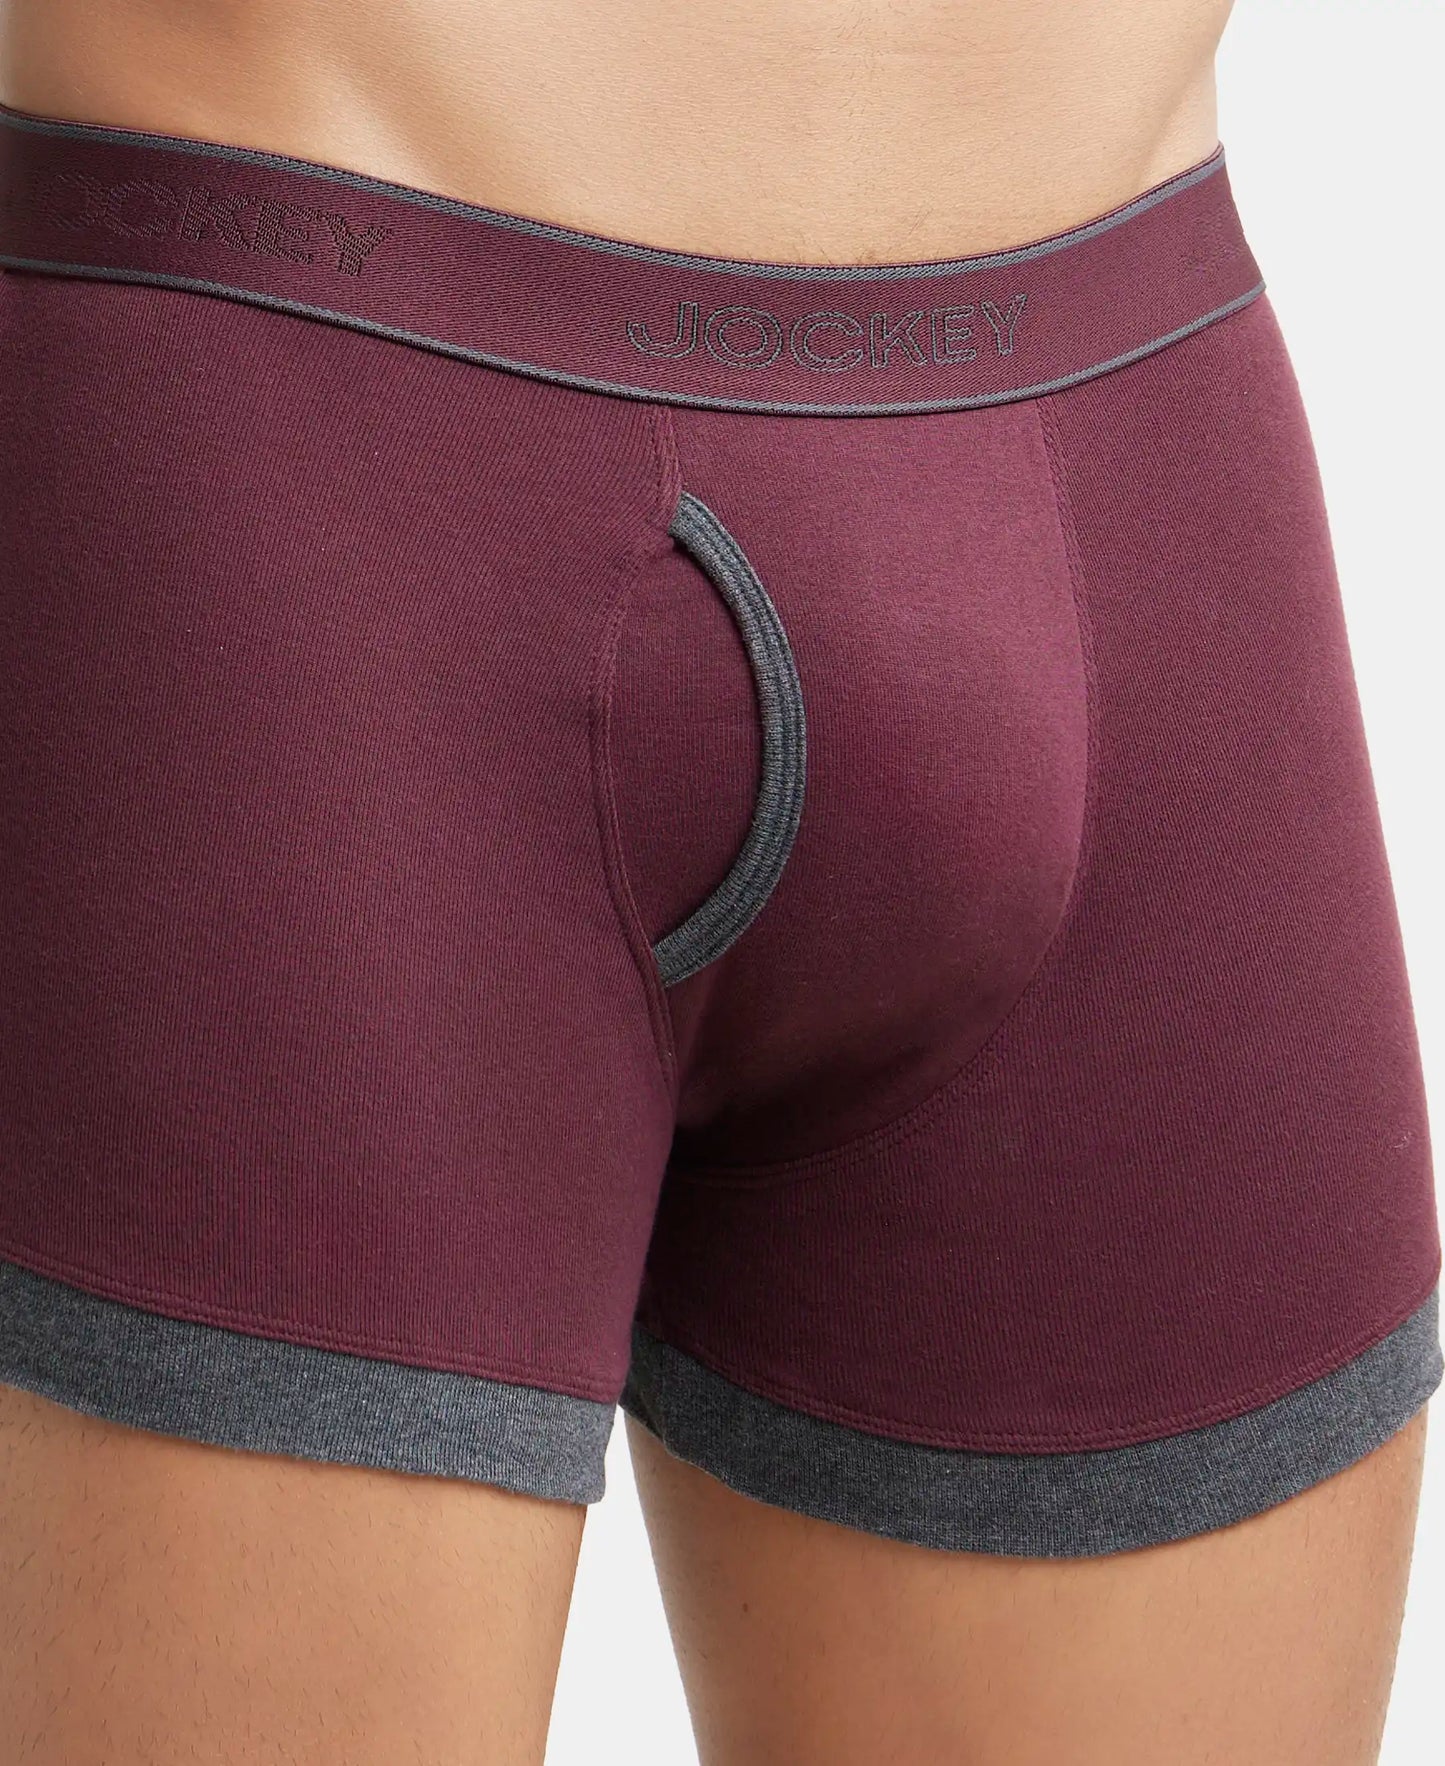 Super Combed Cotton Rib Solid Boxer Brief with StayFresh Treatment - Mauve Wine & Charcoal Melange